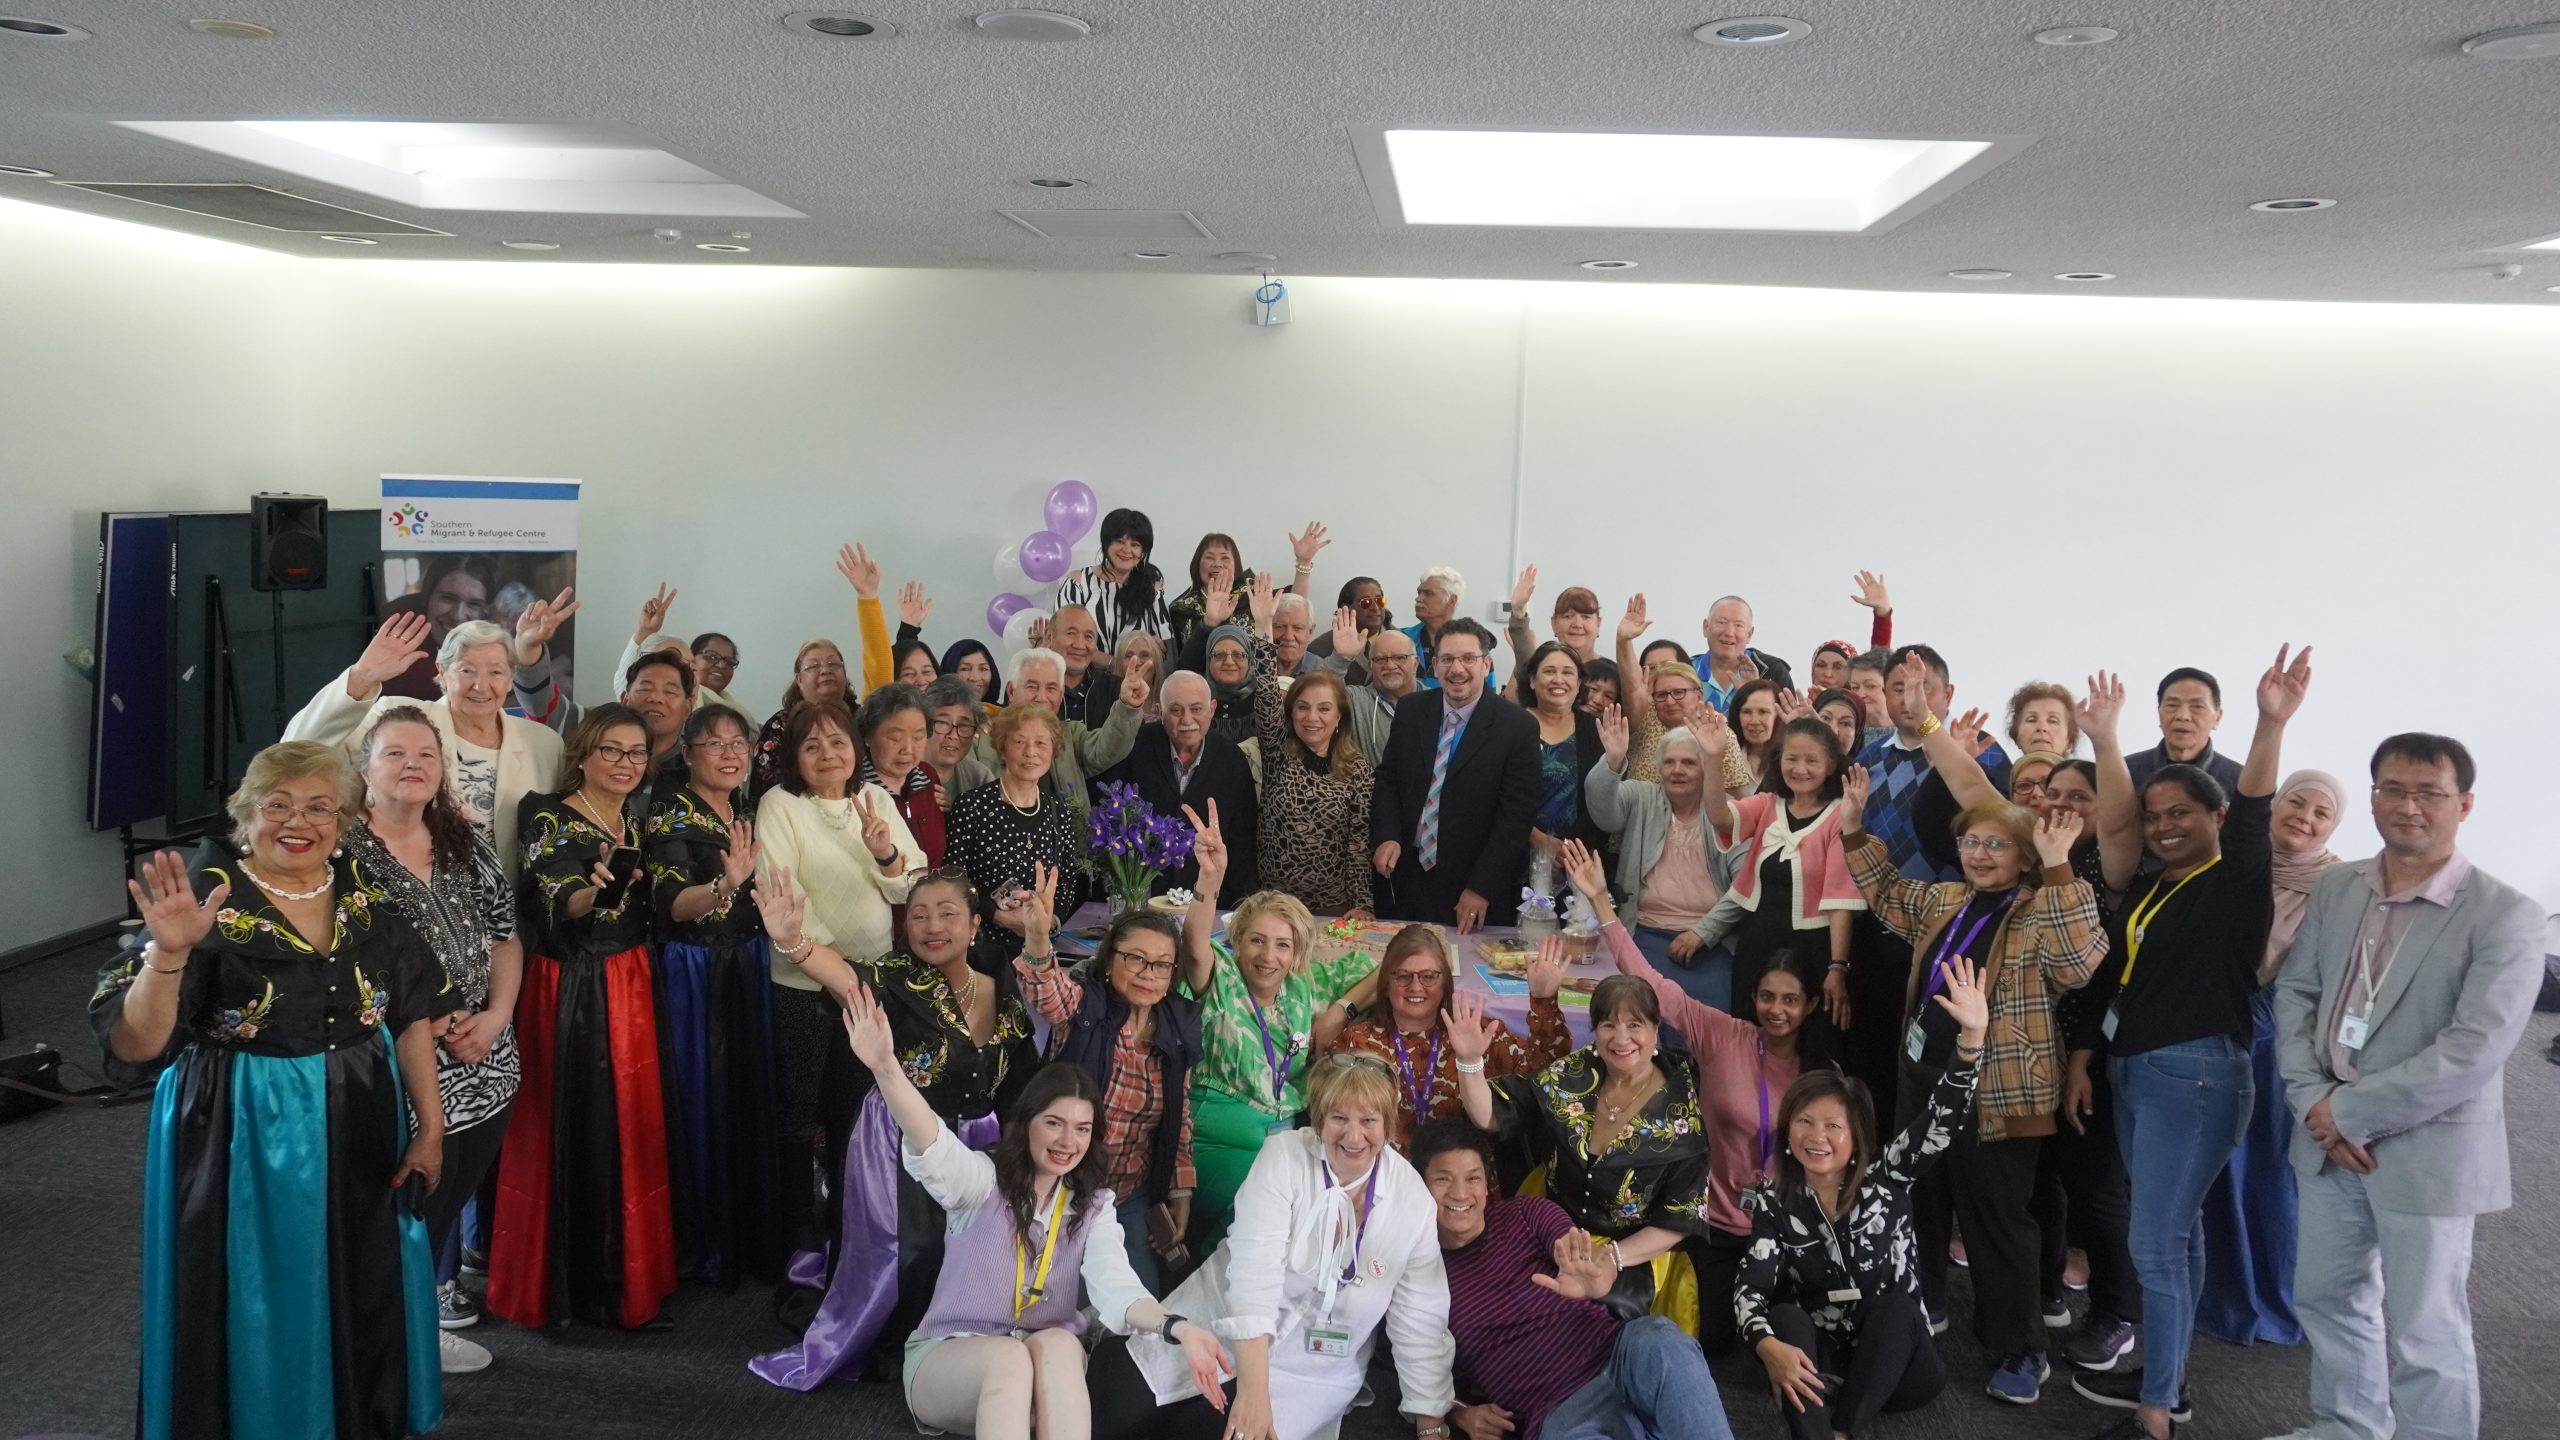 Carers Week recognises and celebrates carers and their outstanding role. People cheering for a photo